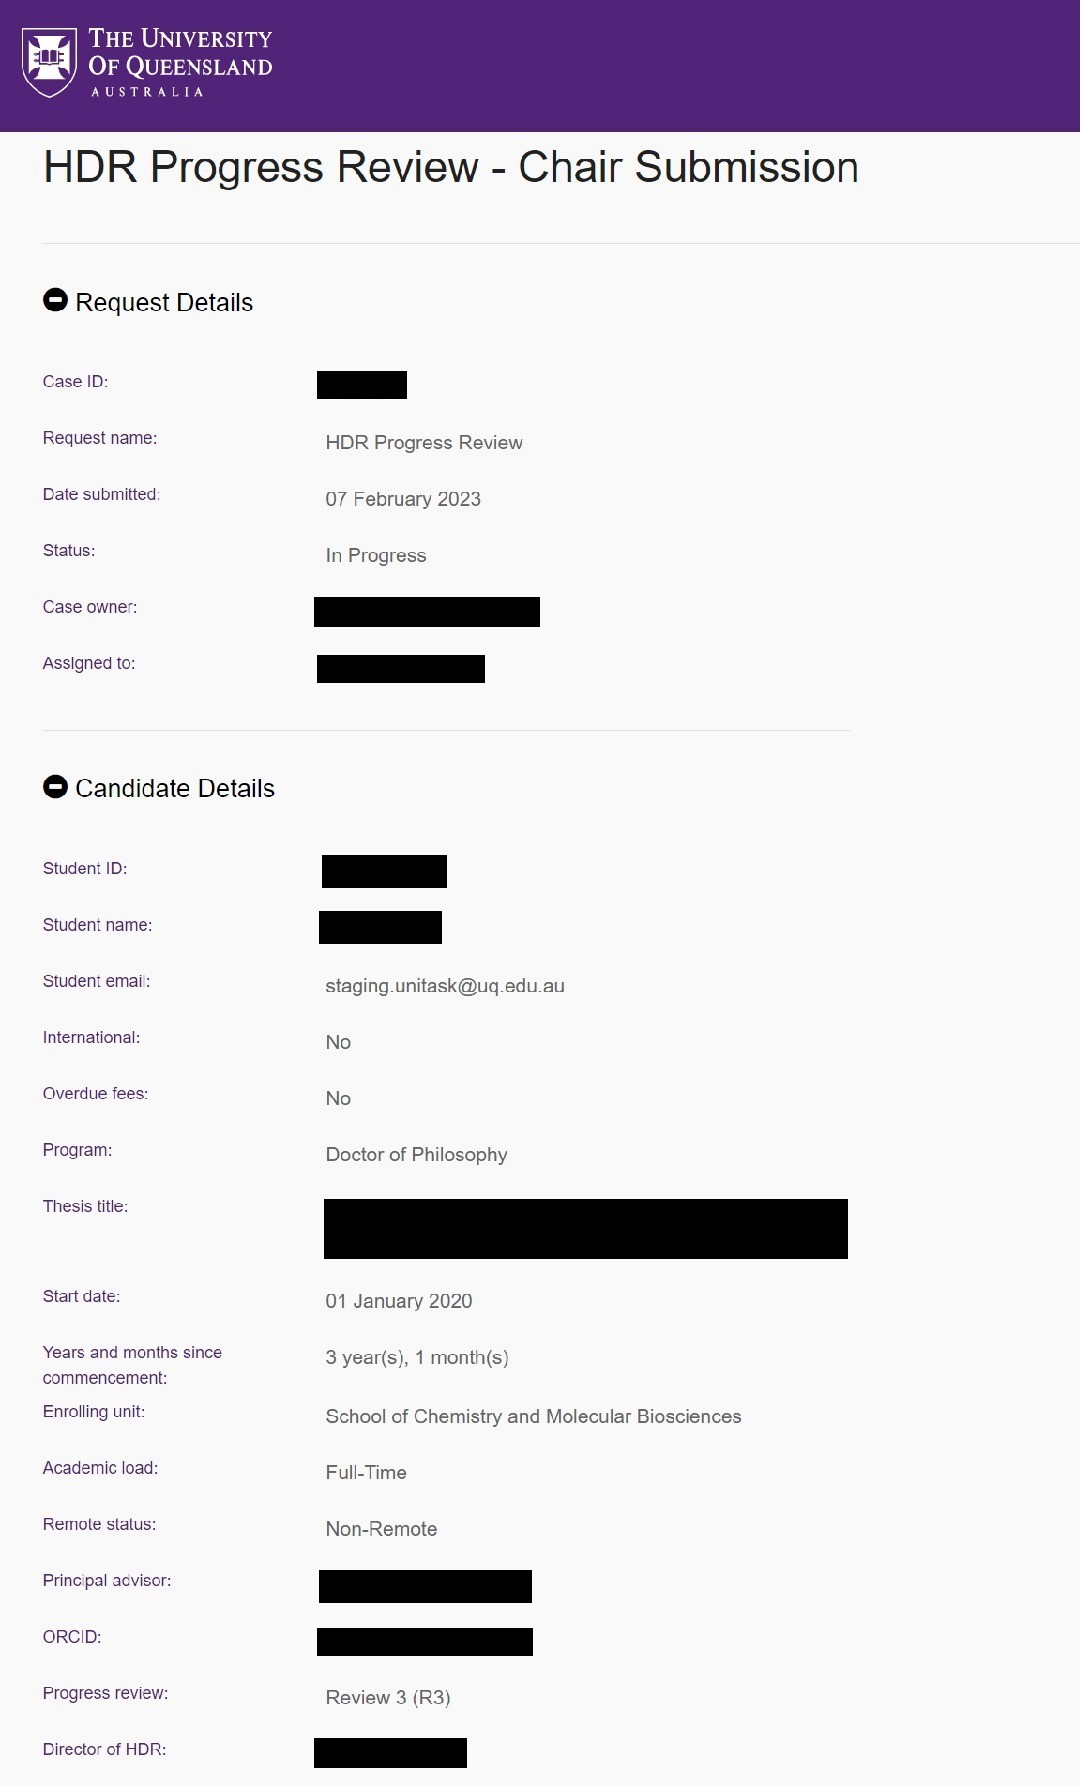 Request and candidate details screenshot